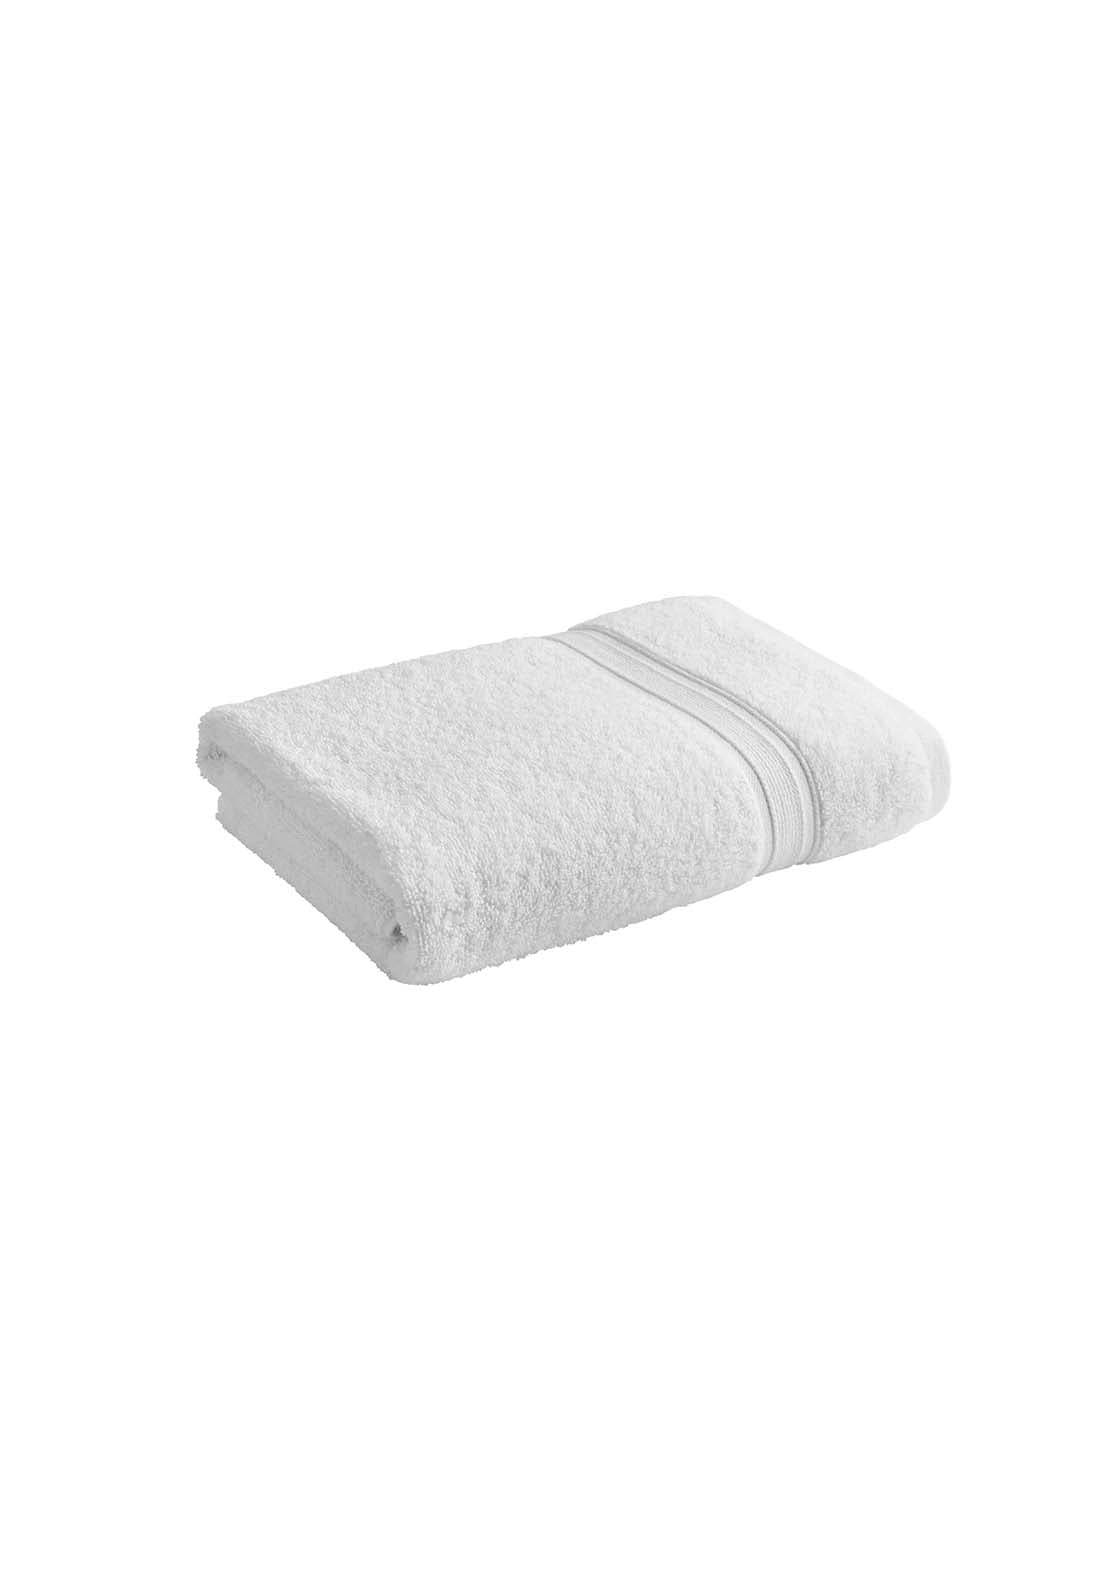 Christy Serene Hand Towel - White 1 Shaws Department Stores